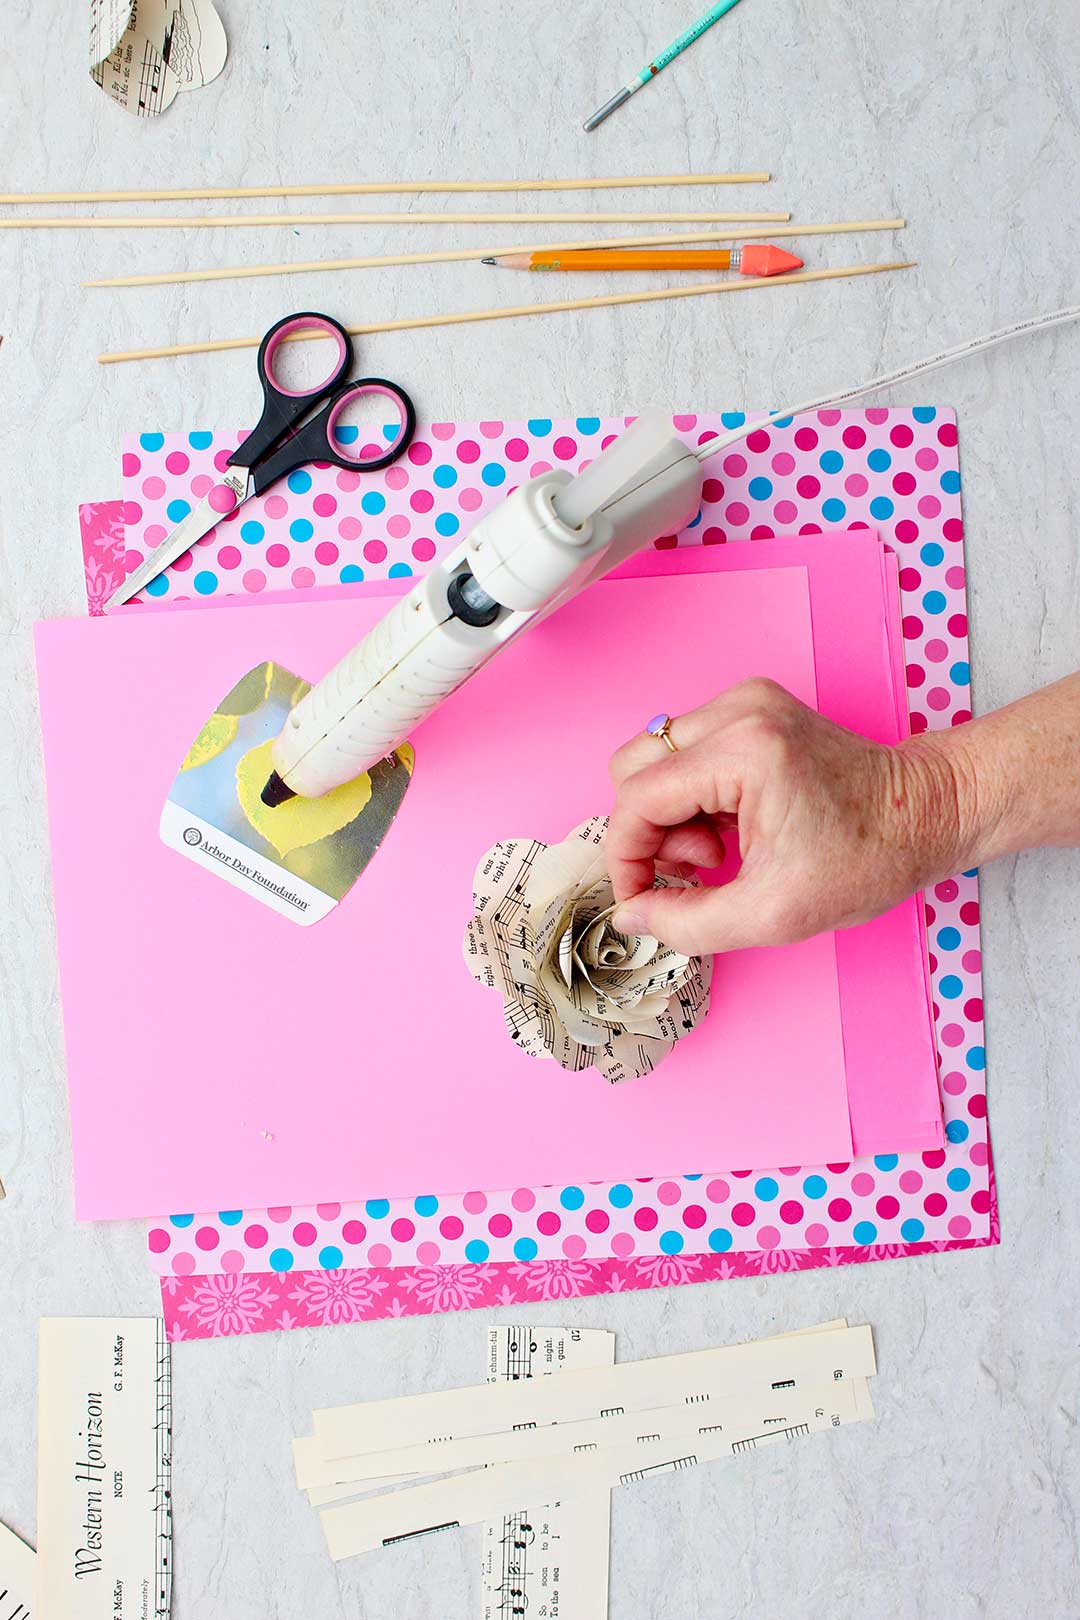 Hand placing paper in the center of an almost completed paper rose sitting on a stack of pink scrapbook paper with other supplies near by.